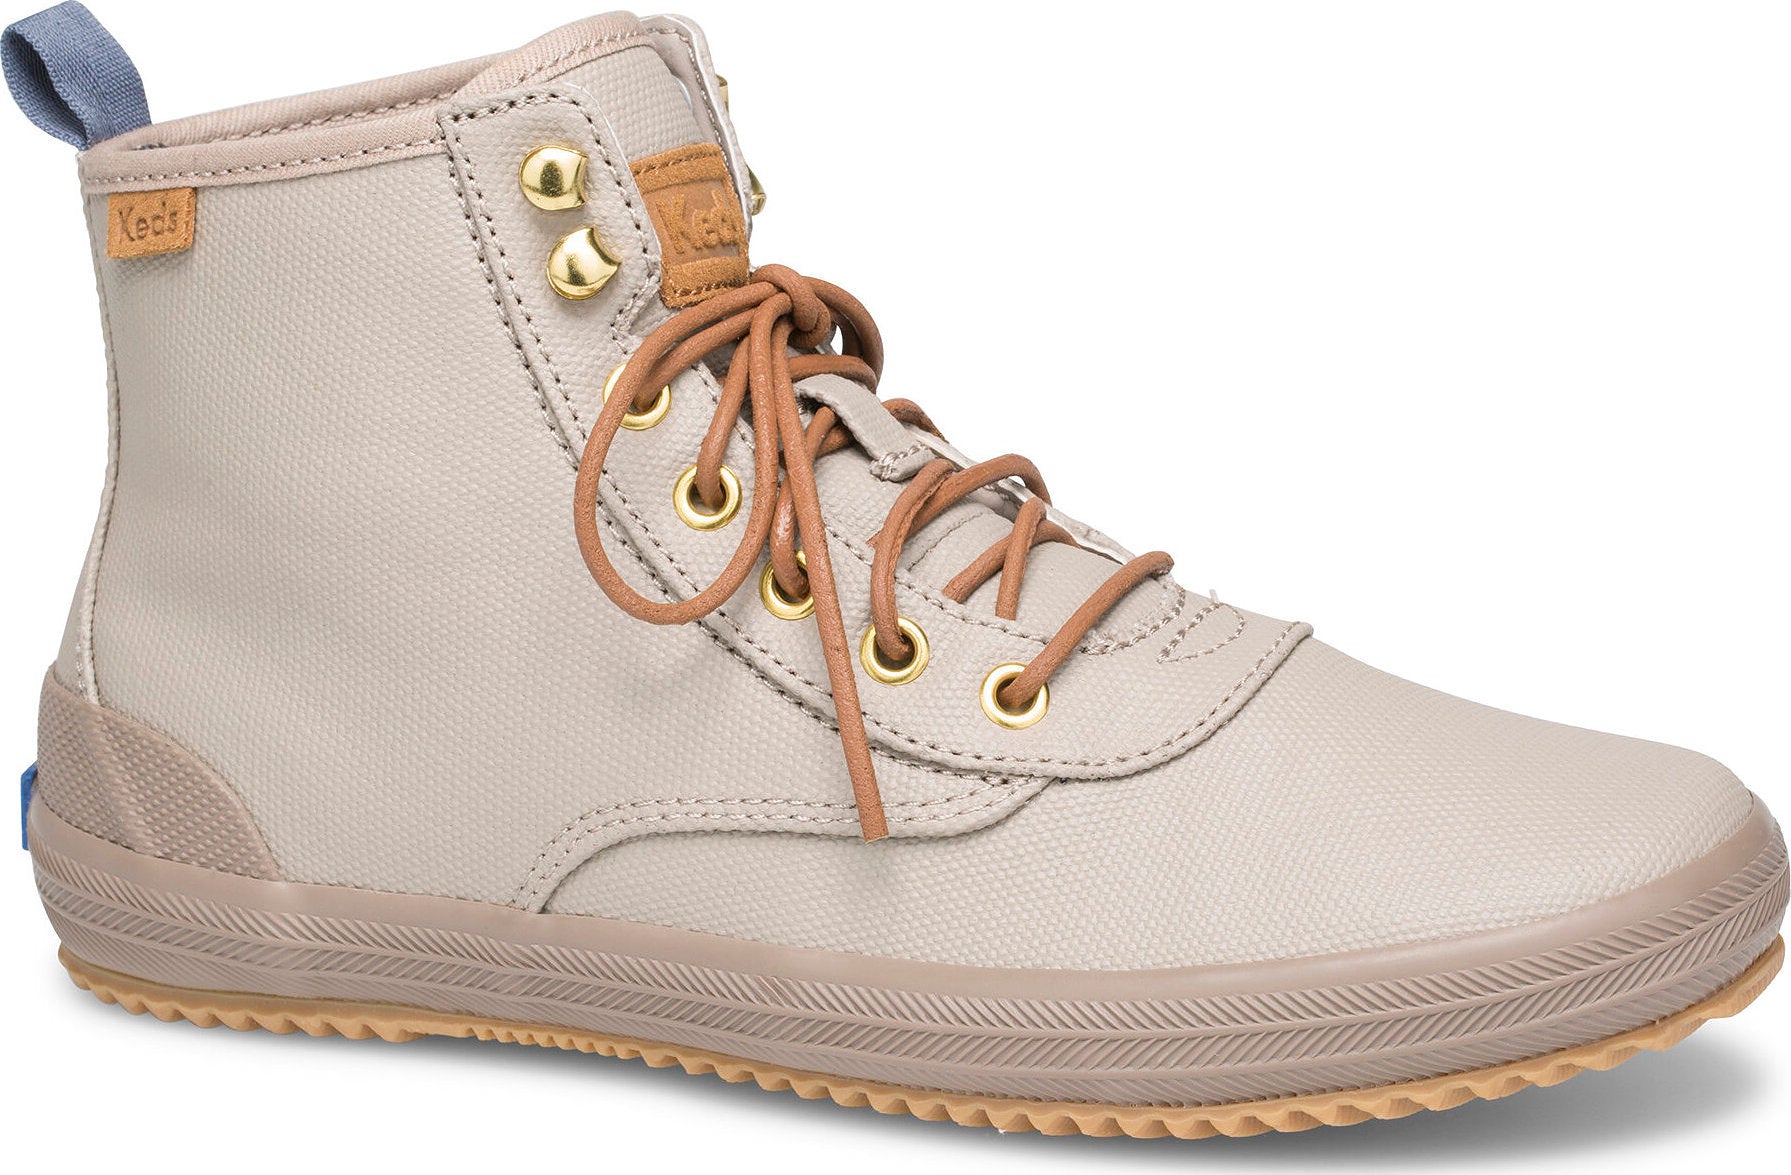 keds scout thinsulate